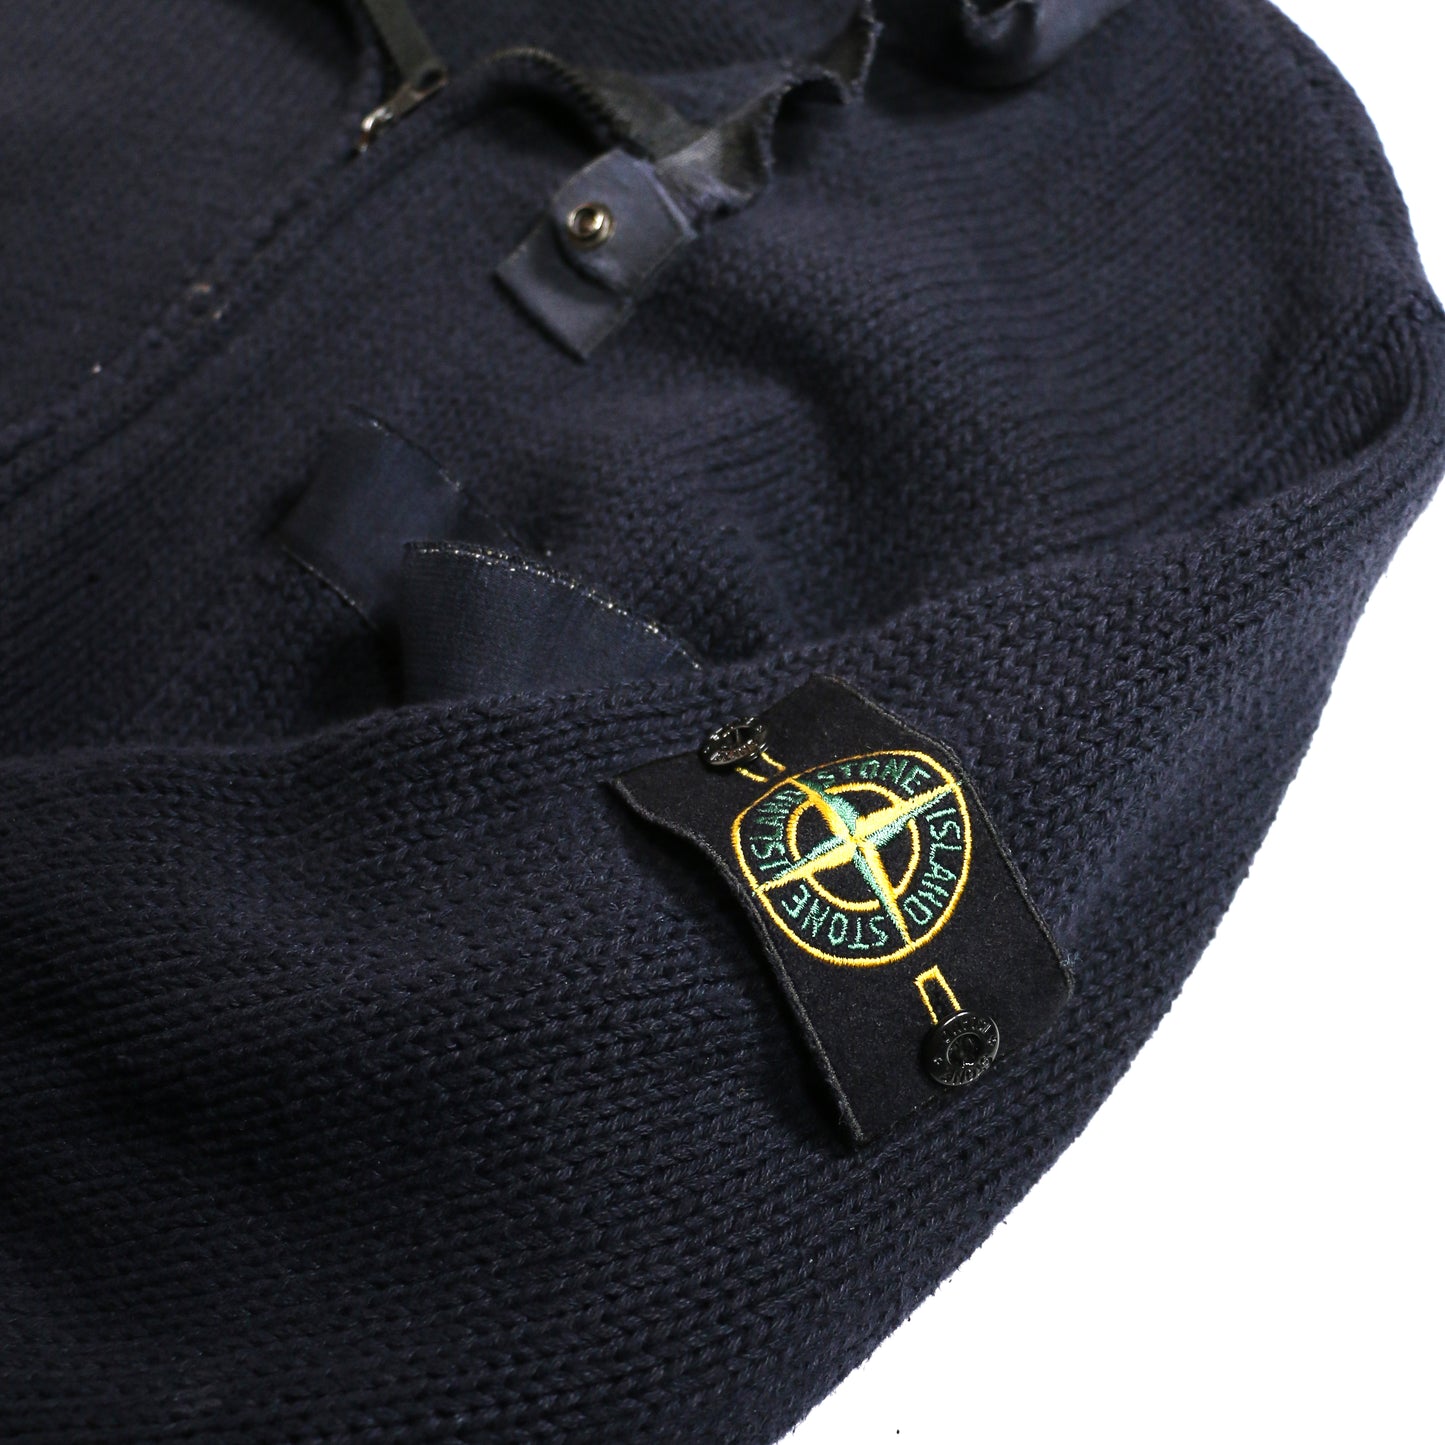 VINTAGE STONE ISLAND 2001SS ZIP KNIT made in Italy / NVY